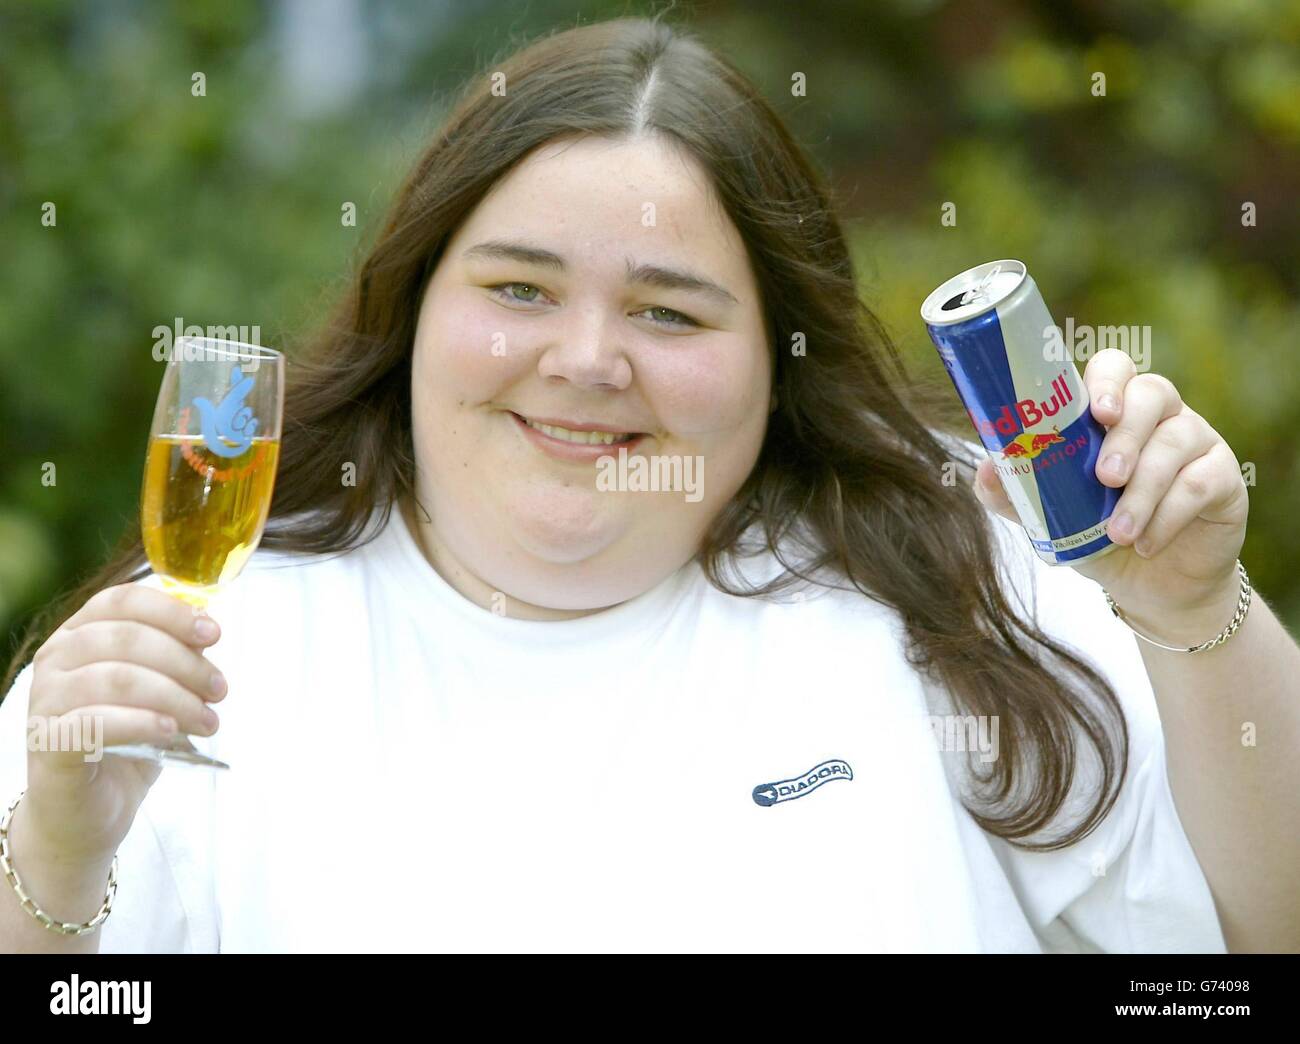 Jubilant Hayley Morrish, 17, celebrates her 1 million Lottery scratch card win with a can of Red Bull at the St David's Park hotel, Chester. The petrol station cashier earning 3.80-an-hour tried her luck on a 5 'Bullion' card during a quiet shift in Tarvin, Cheshire and landed the top prize. She told reporters she intends to buy driving lessons and a Citroen Saxo. Stock Photo